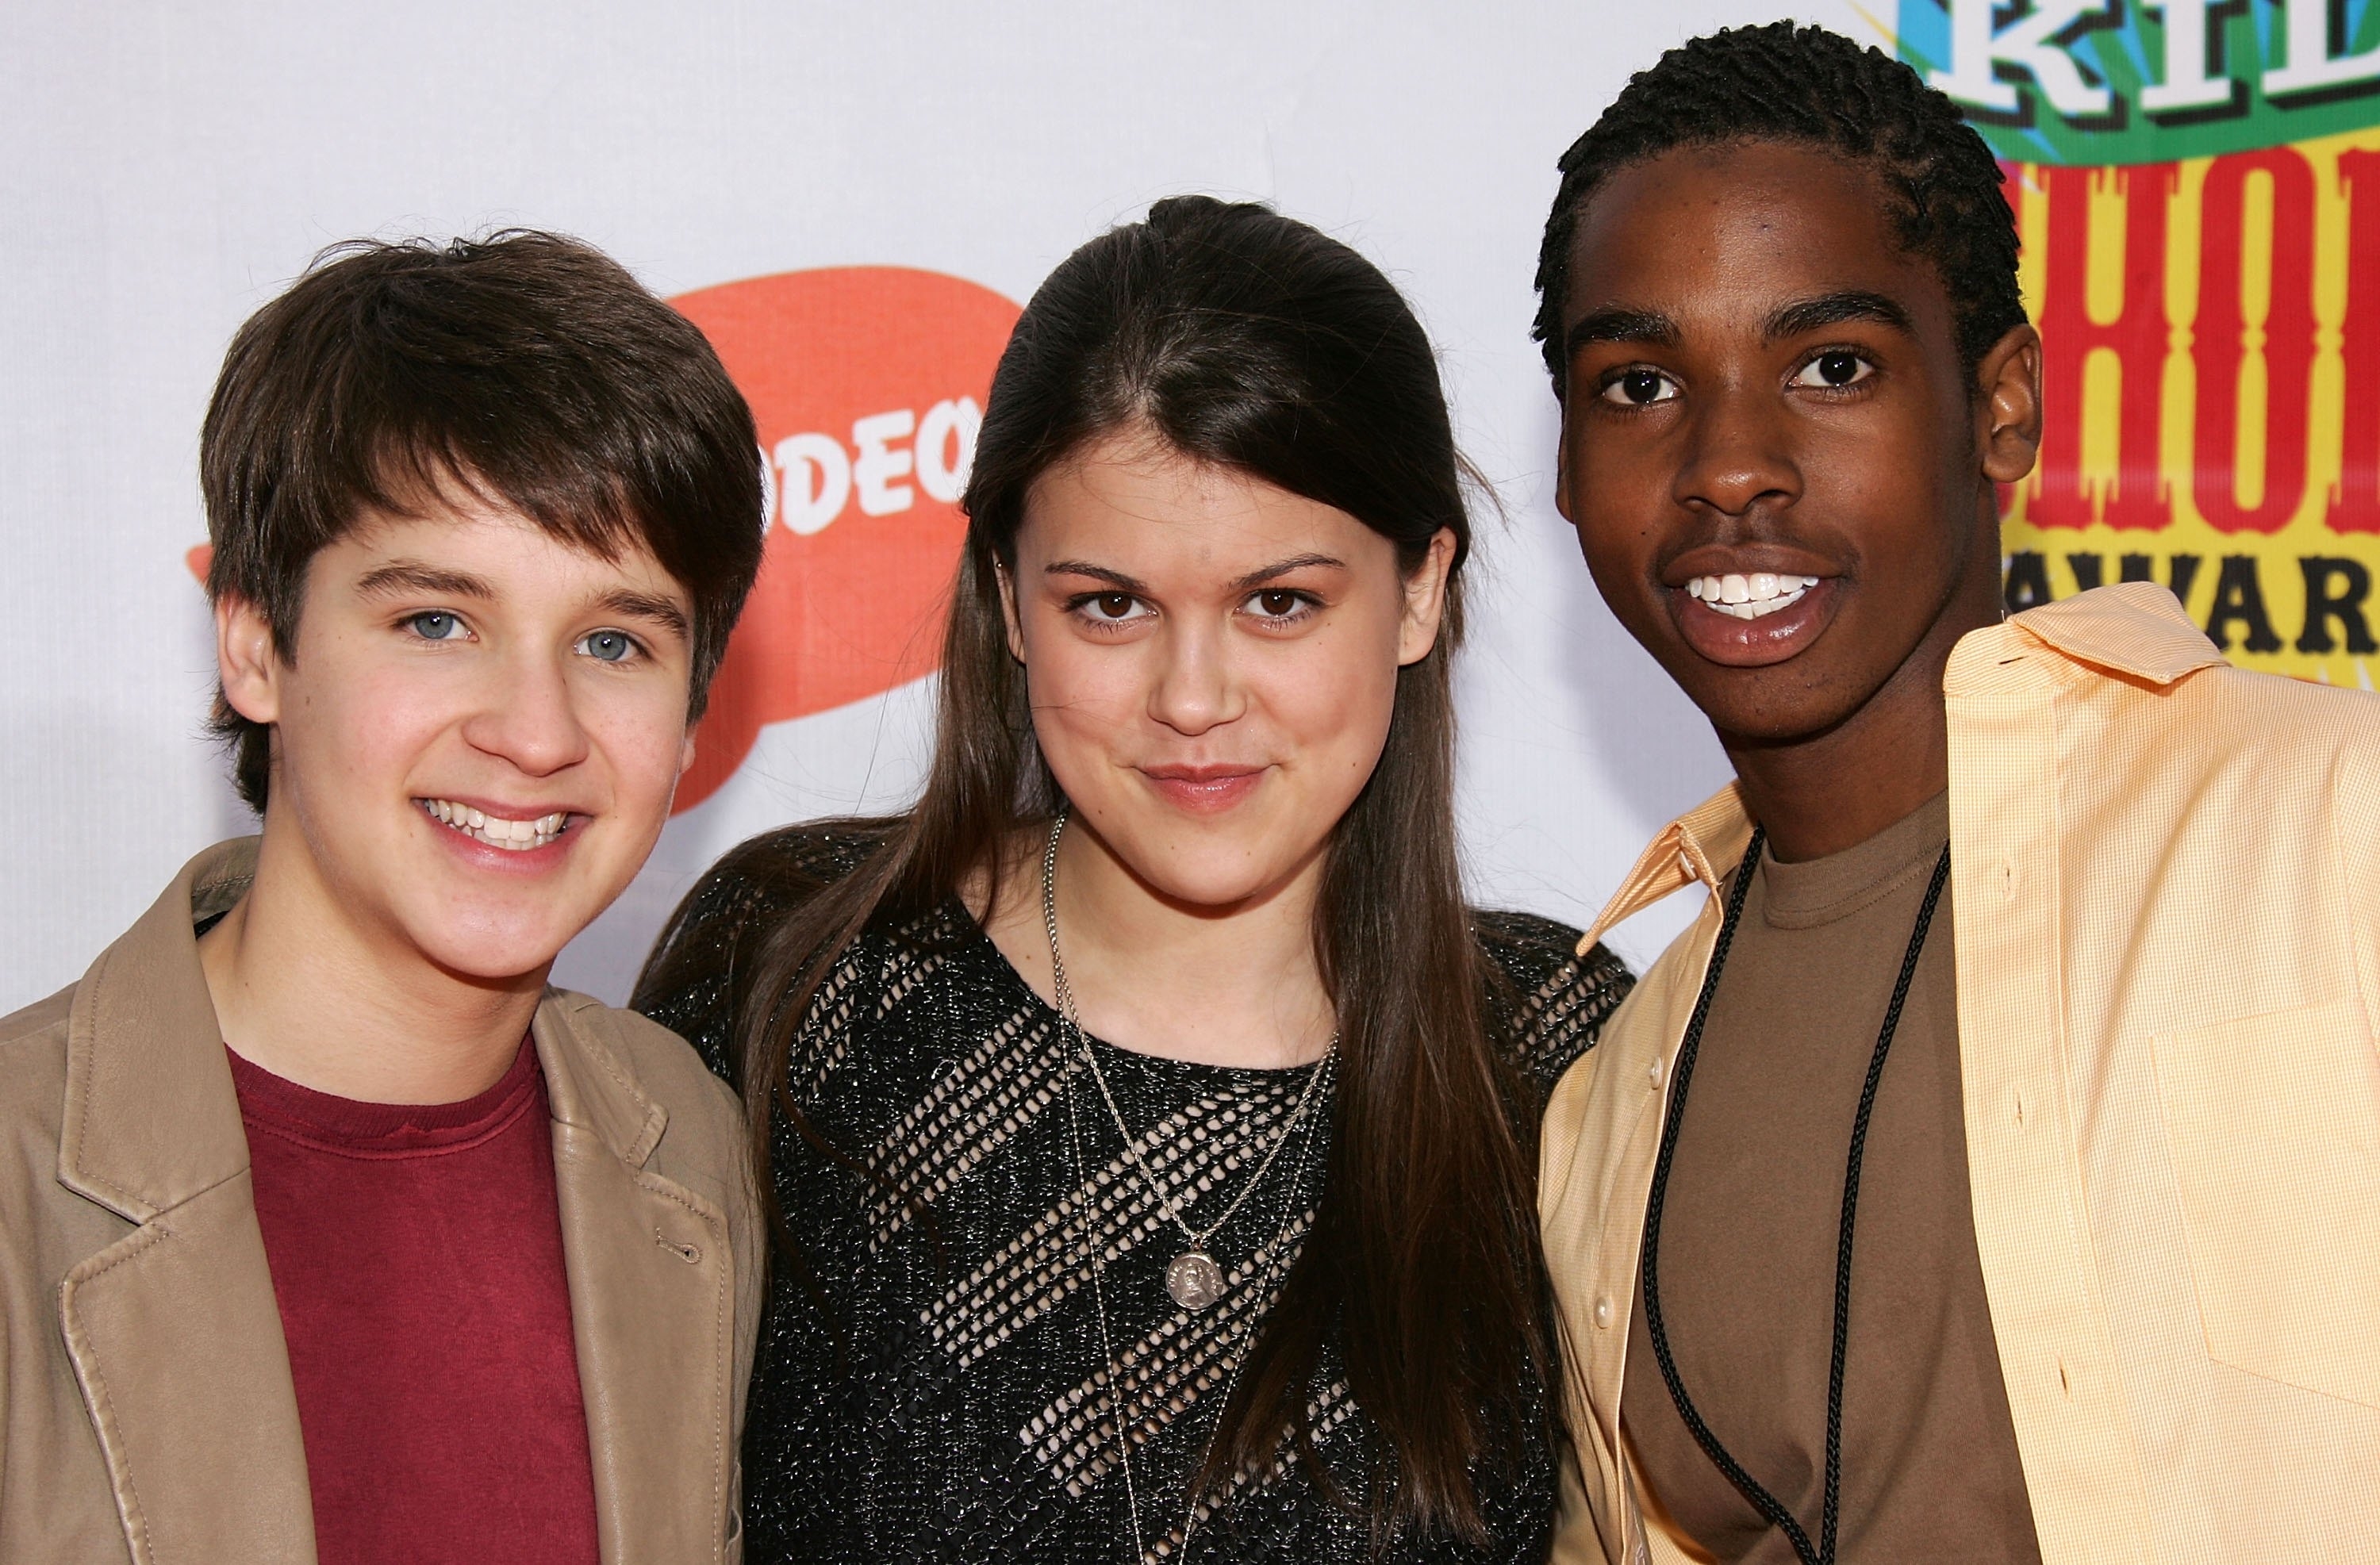 Devon Werkheiser, Lindsey Shaw, and Daniel Curtis Lee when they were younger actors on the red carpet